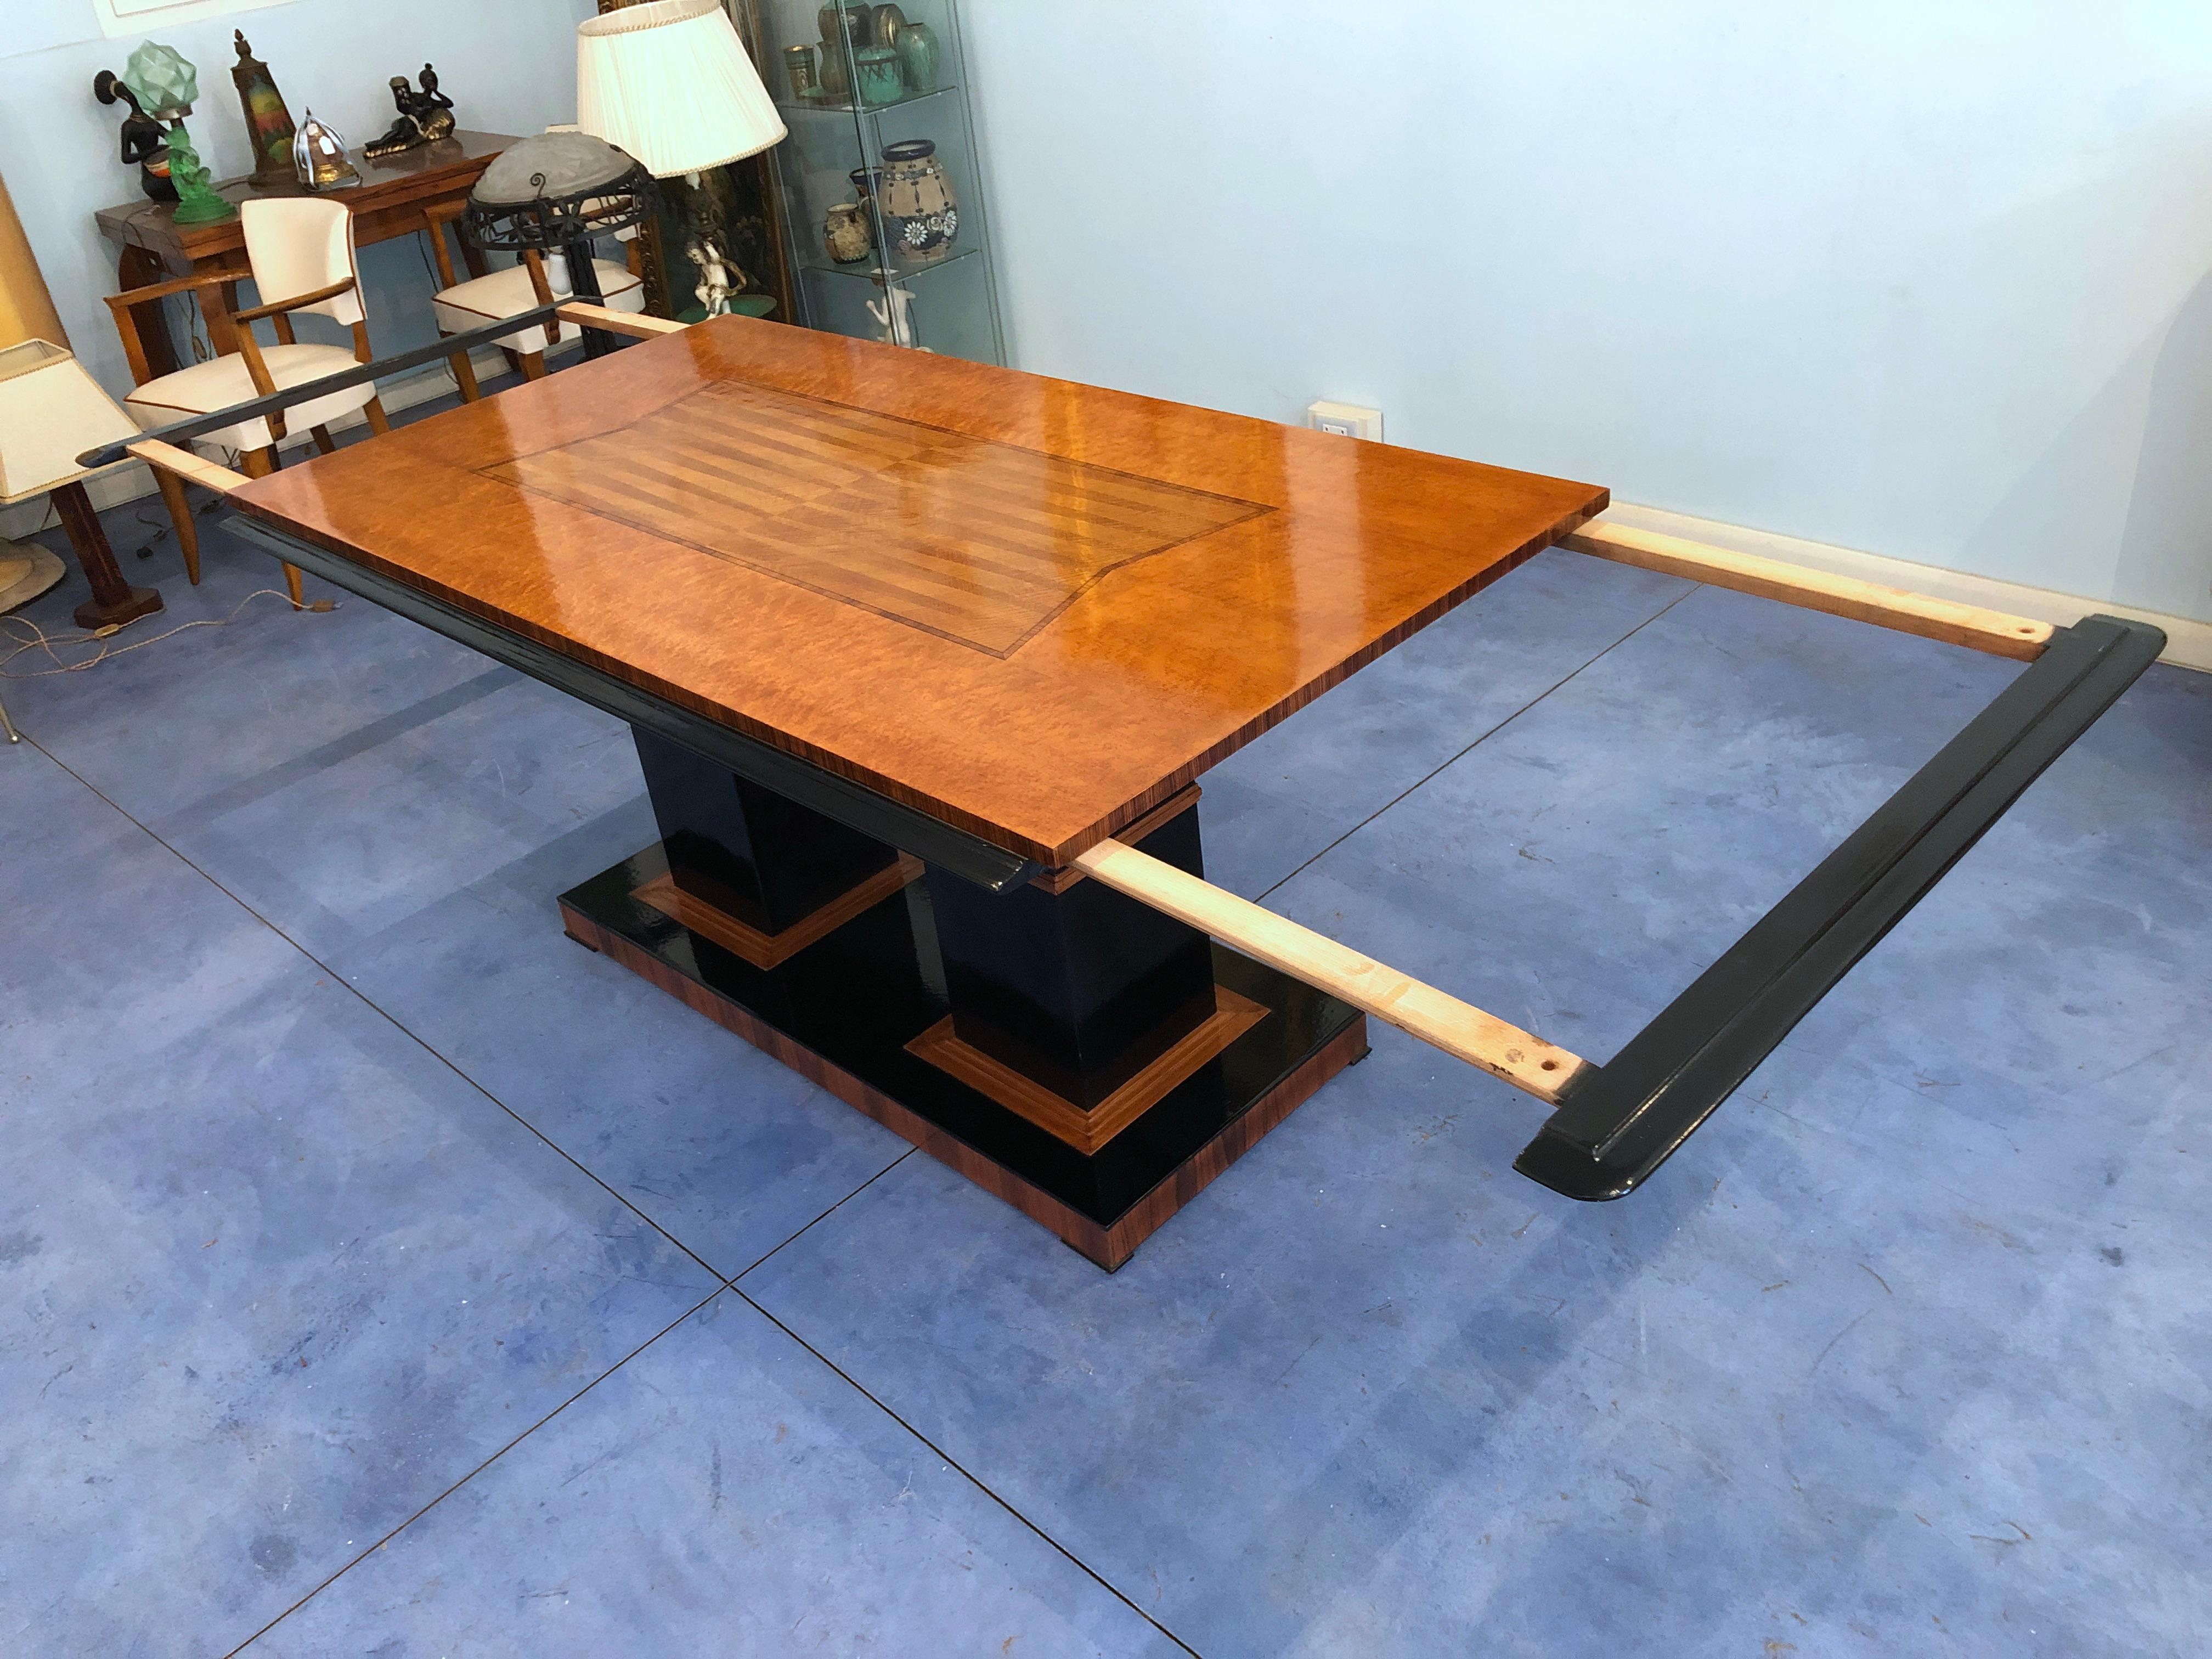 Italian Art Deco Dining Table in Maple with Decoration, 1940s For Sale 8